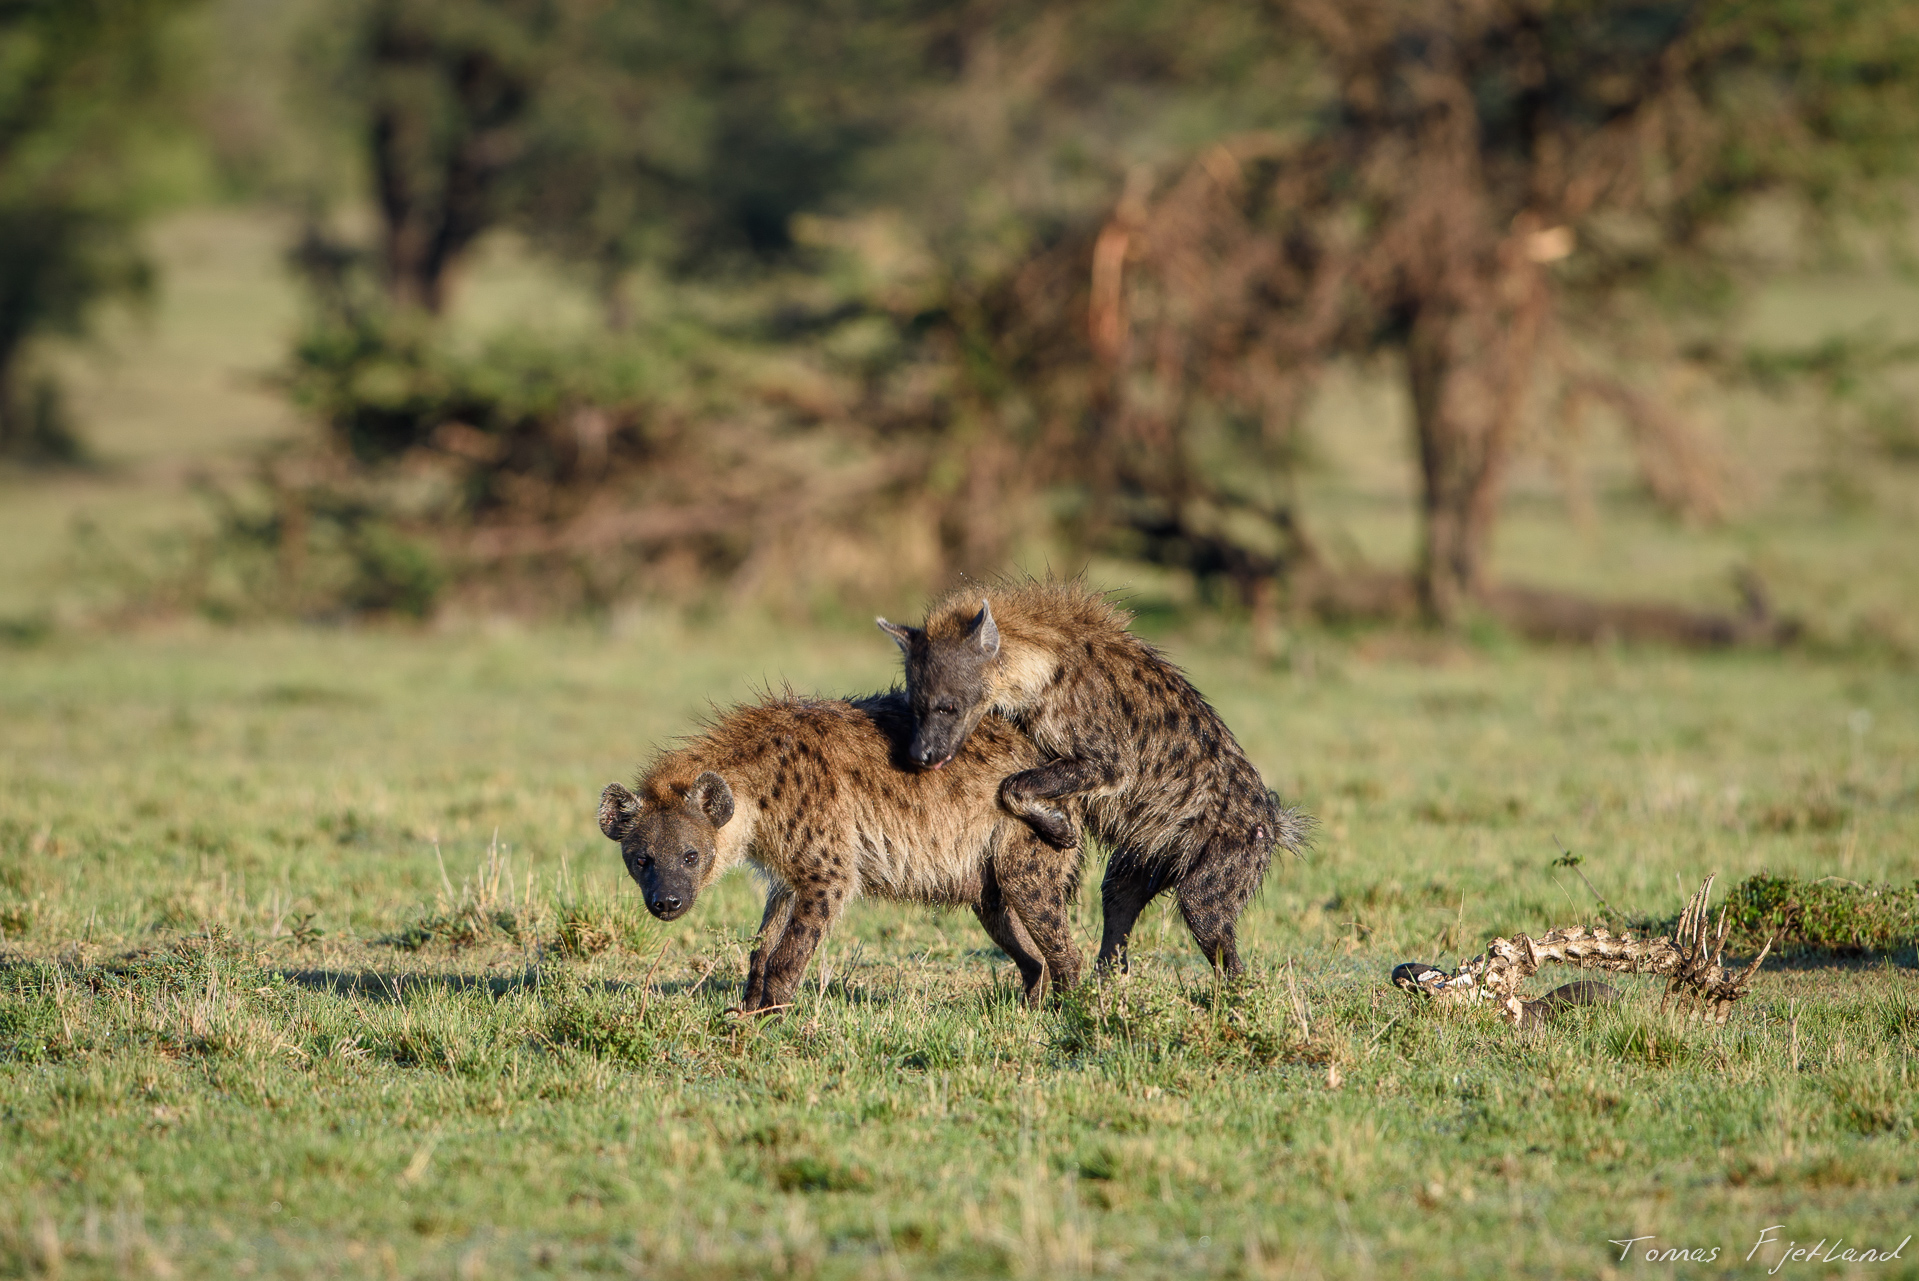 A pair of spotted hyenas mating. There's a lot of growling and howling.